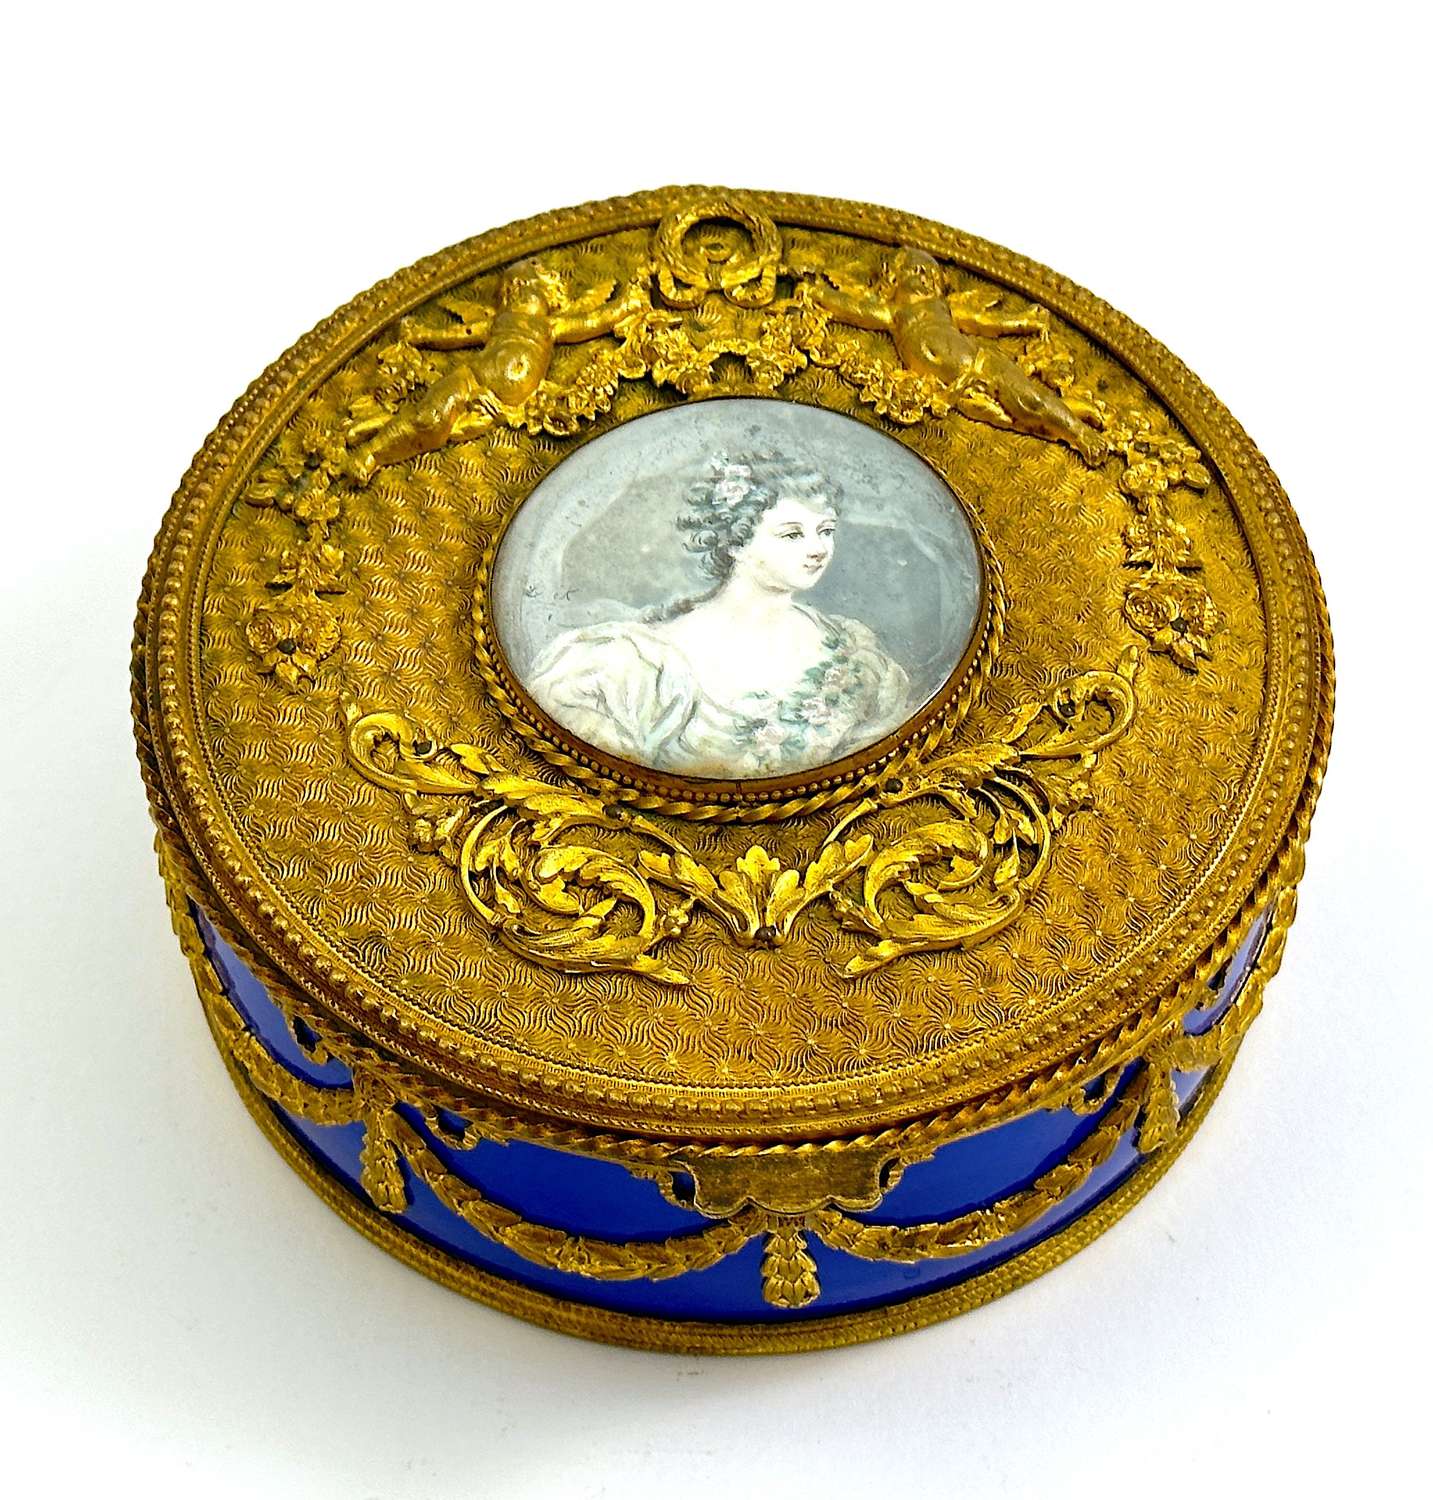 Large Antique French Porcelain Box with a Fine Quality Miniature